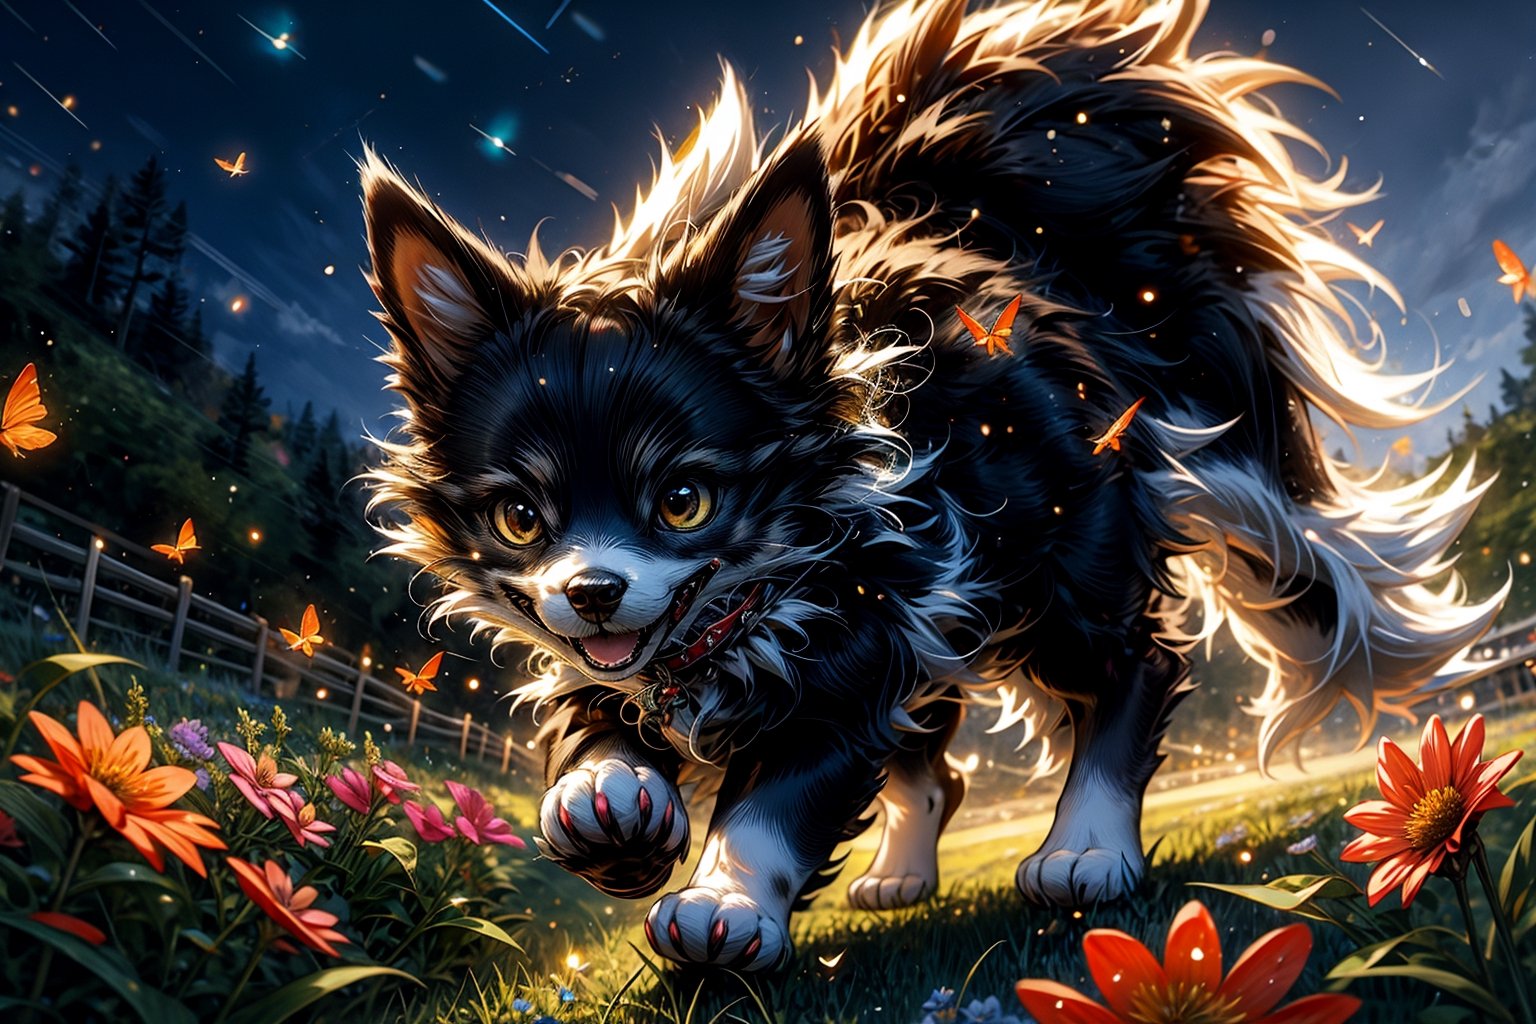 High quality, masterpiece, a dog chasing a group of fireflies across a plain full of wildflowers